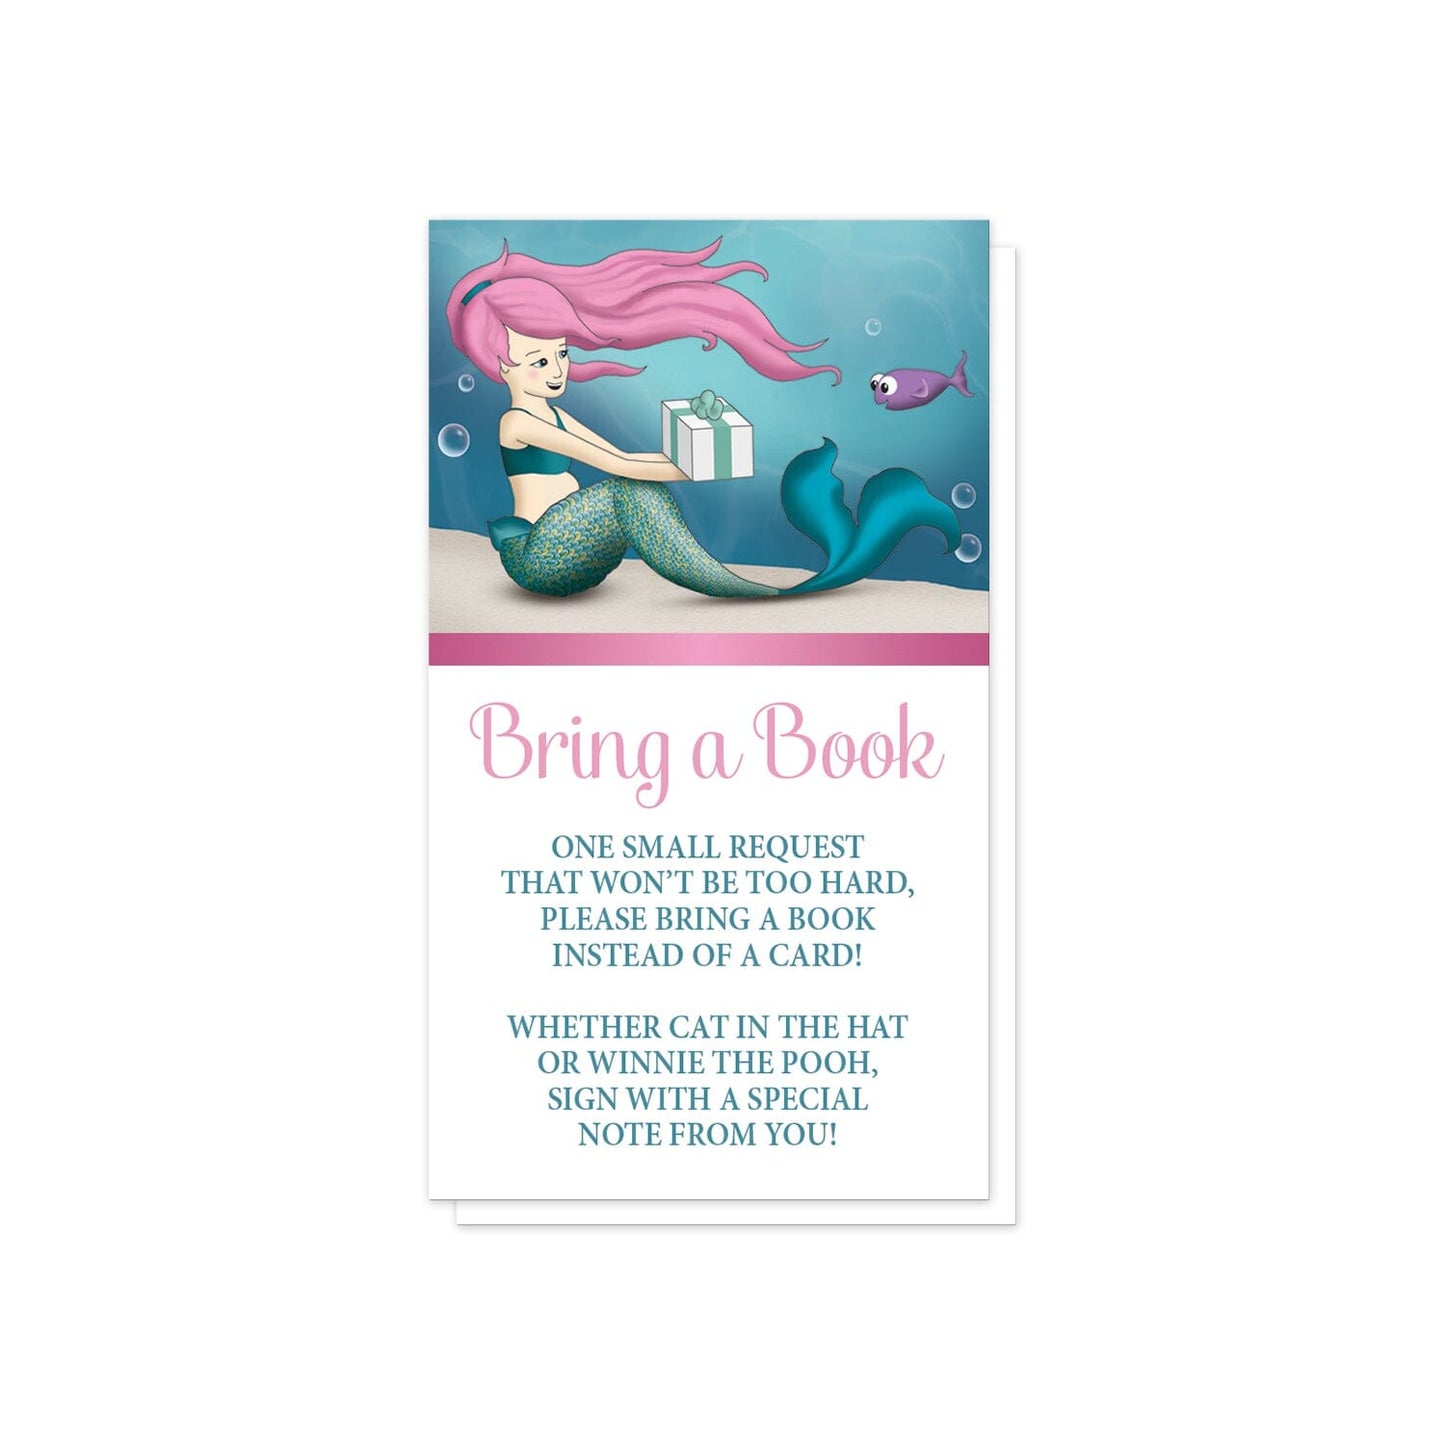 Under the Sea Mermaid Bring a Book Cards at Artistically Invited. Uniquely illustrated under the sea mermaid bring a book cards designed with an expecting mermaid with pink hair receiving a gift from a happy little purple fish at the top. Your book request details are printed in pink and turquoise on white below the mermaid design.